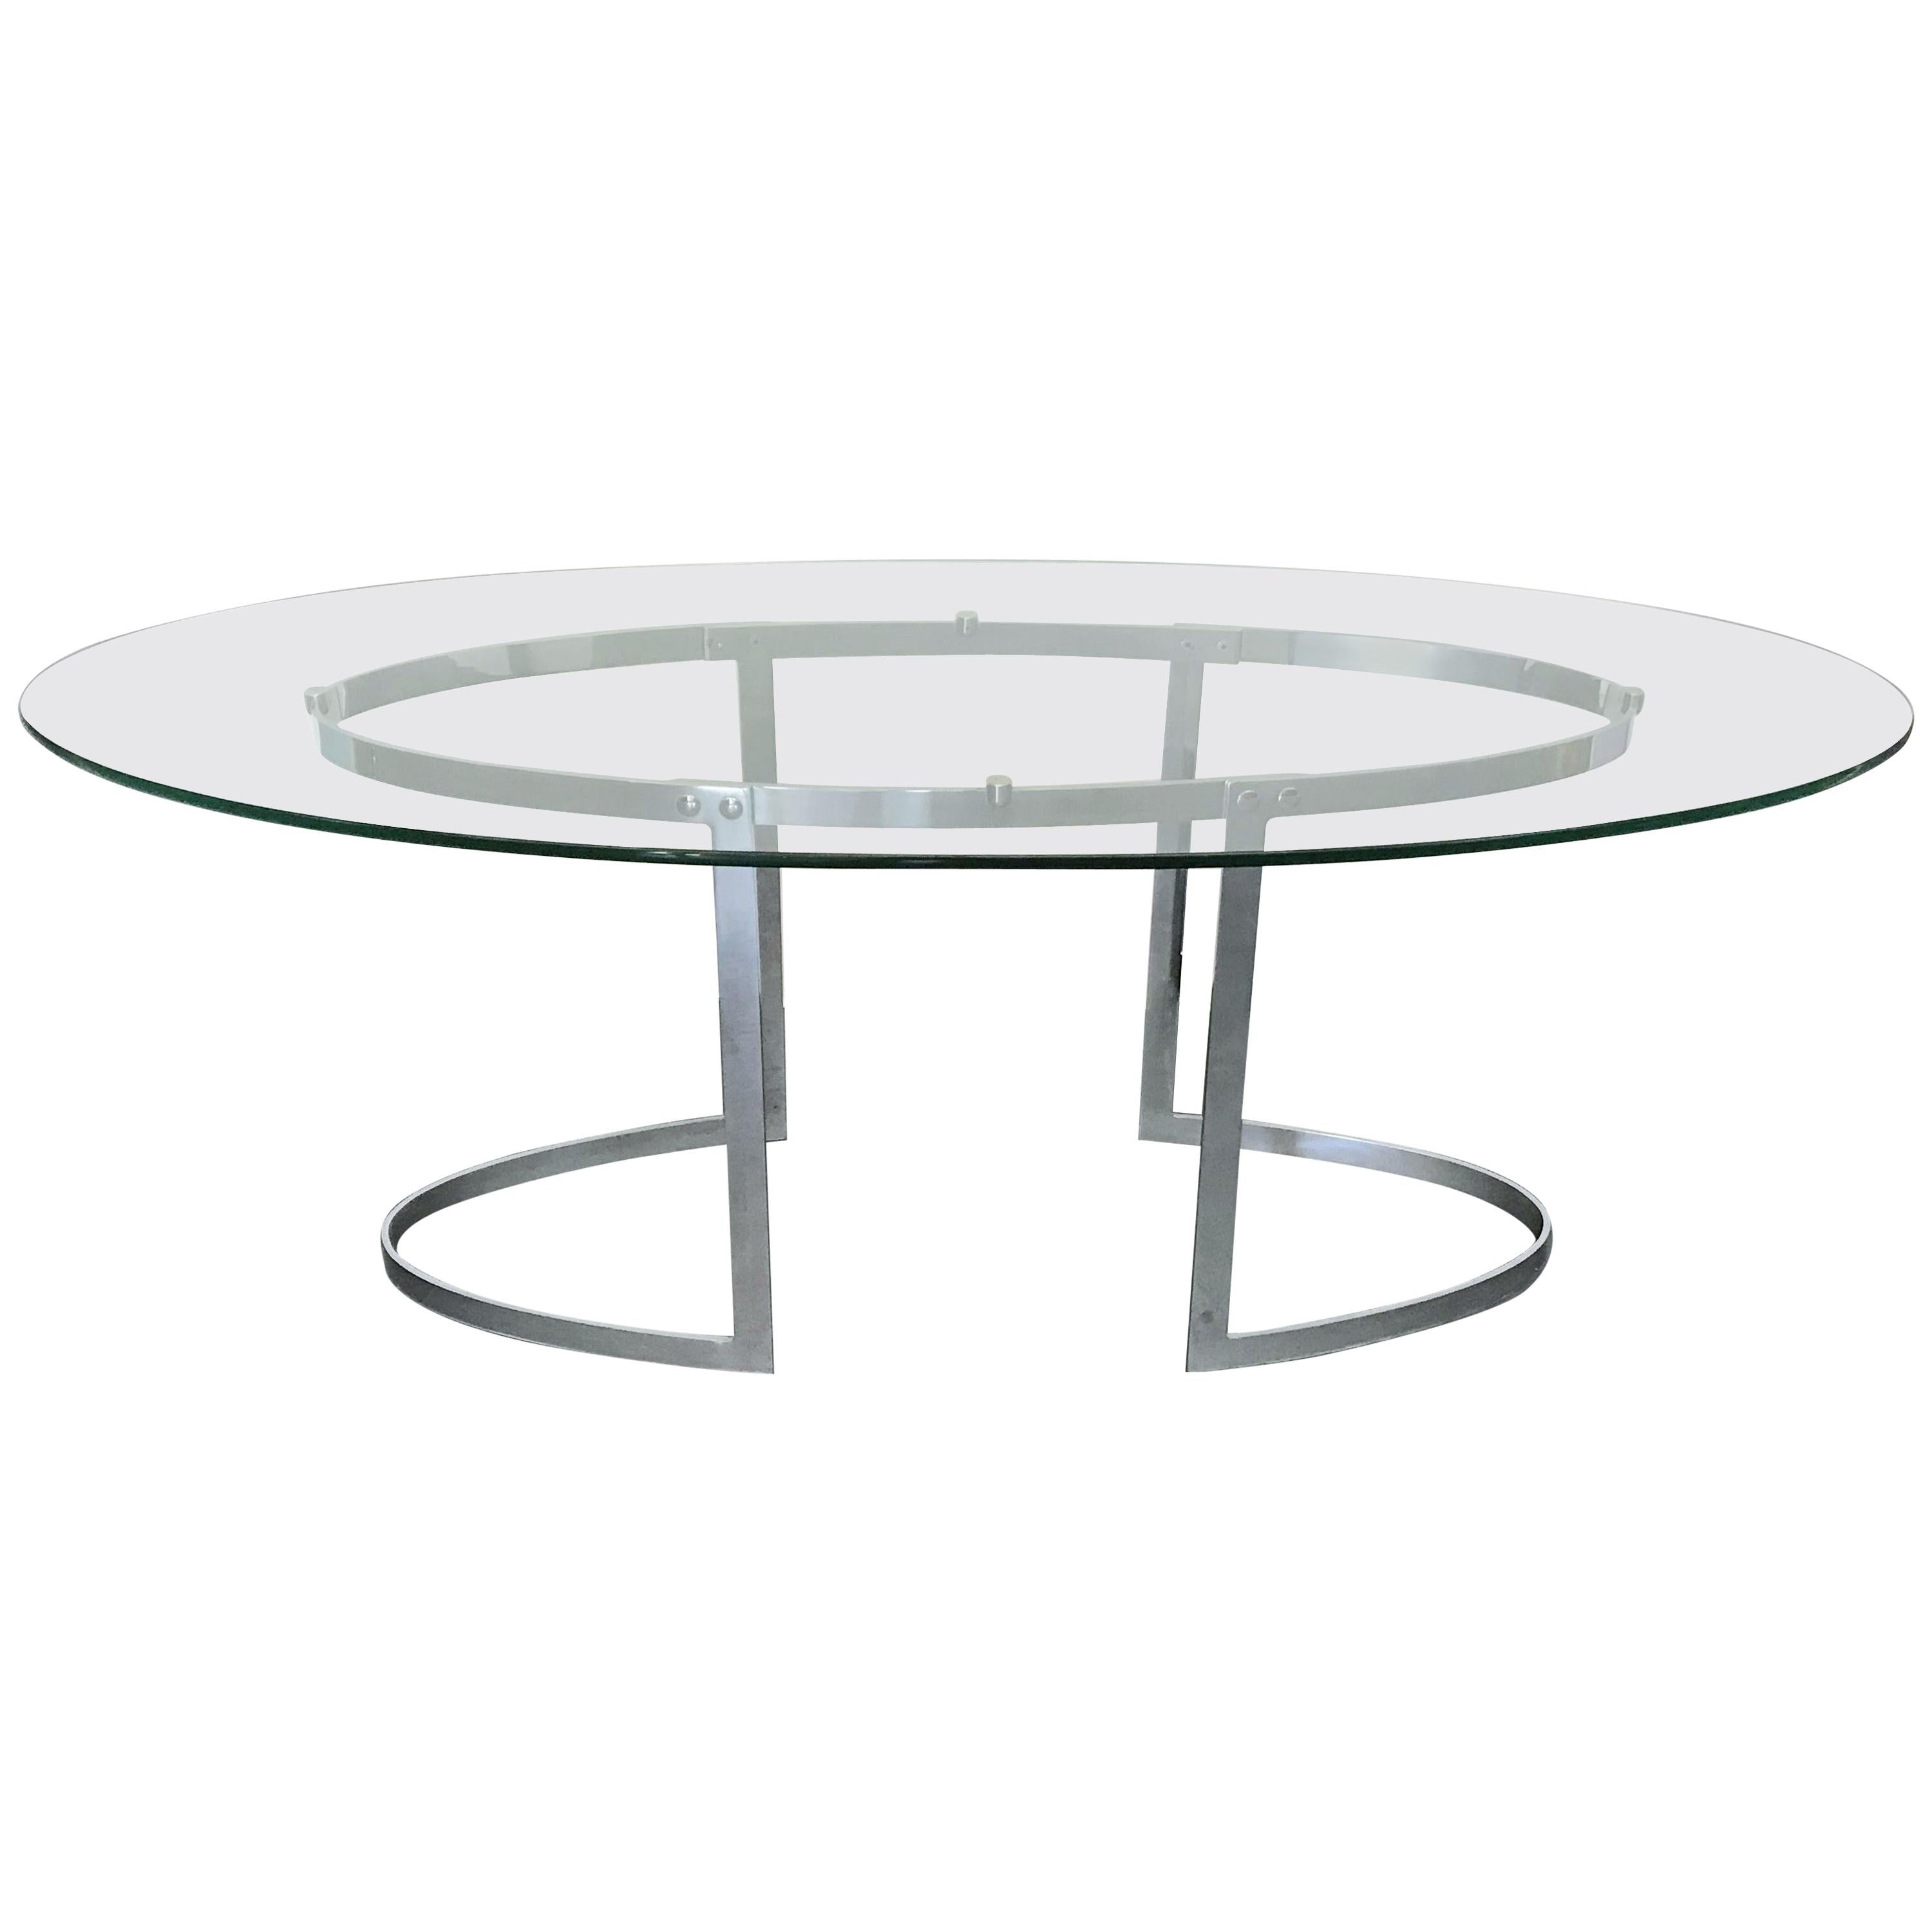 Stainless Steel Table FINAL CLEARANCE SALE